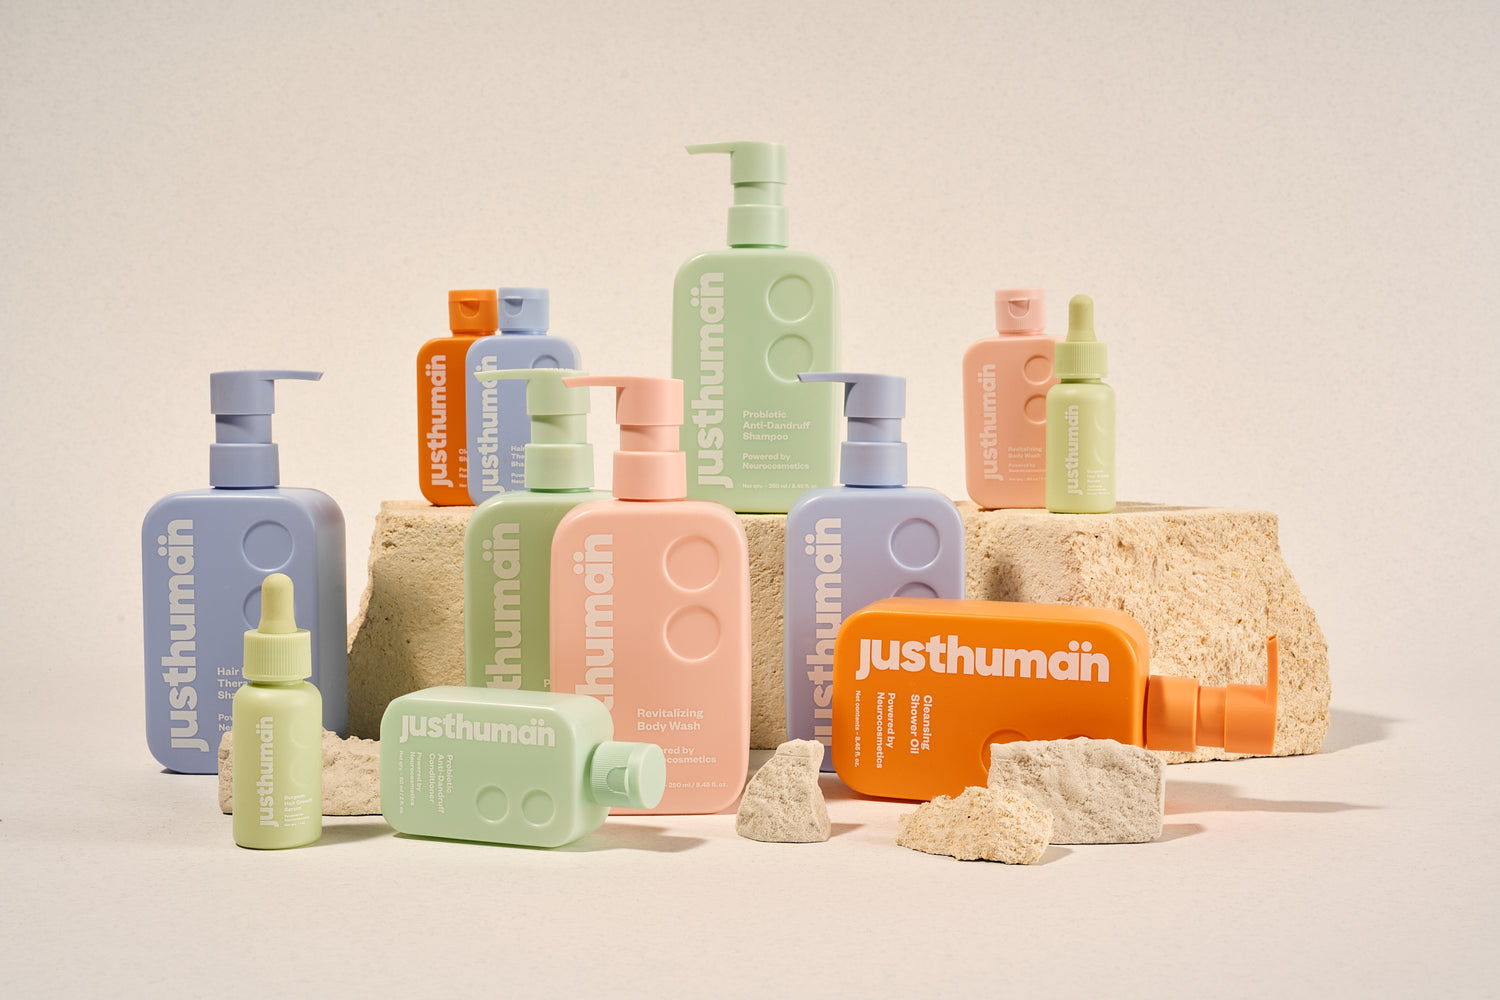 Justhuman products